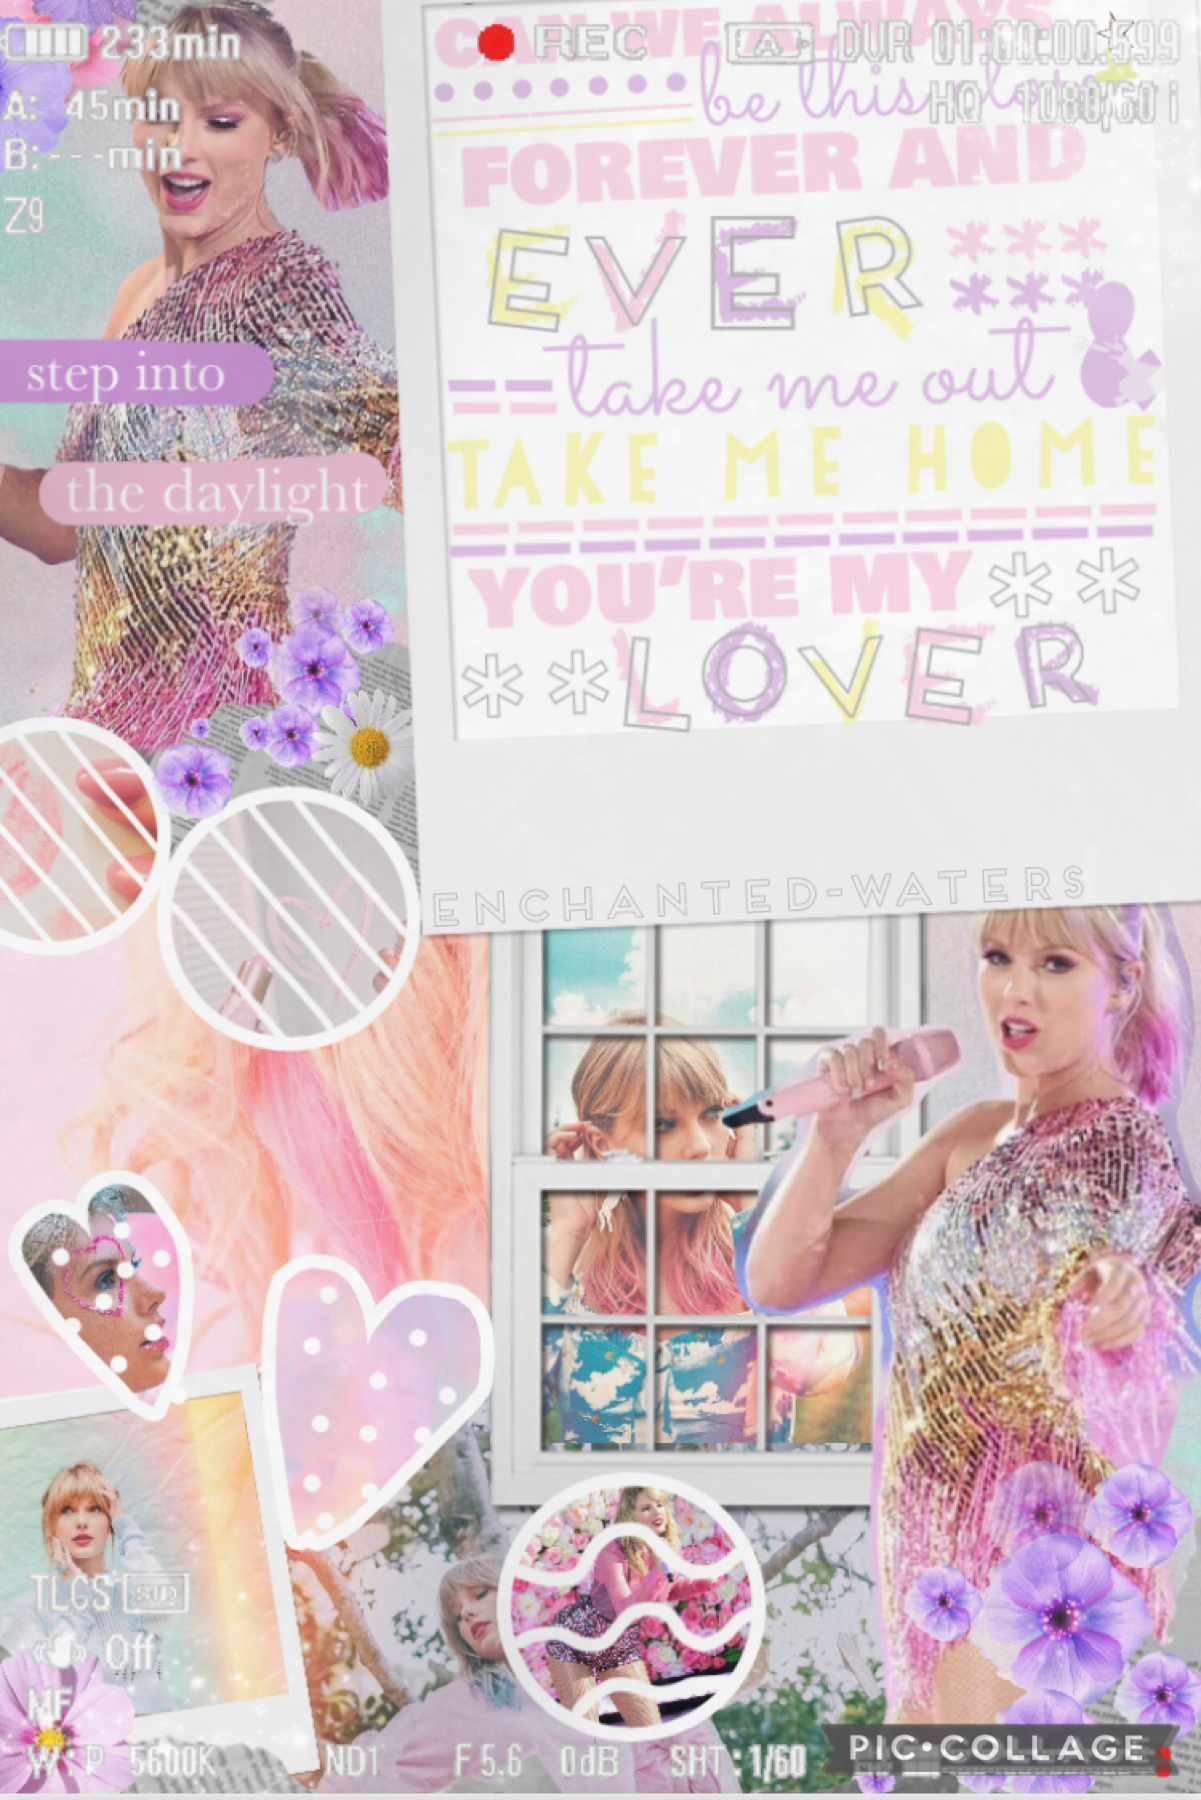 💗 T A P 💗
I’m still figuring out what my new theme will be.. but I like this collage :) QOTD: fav singer? AOTD: Taylor Swift!! 